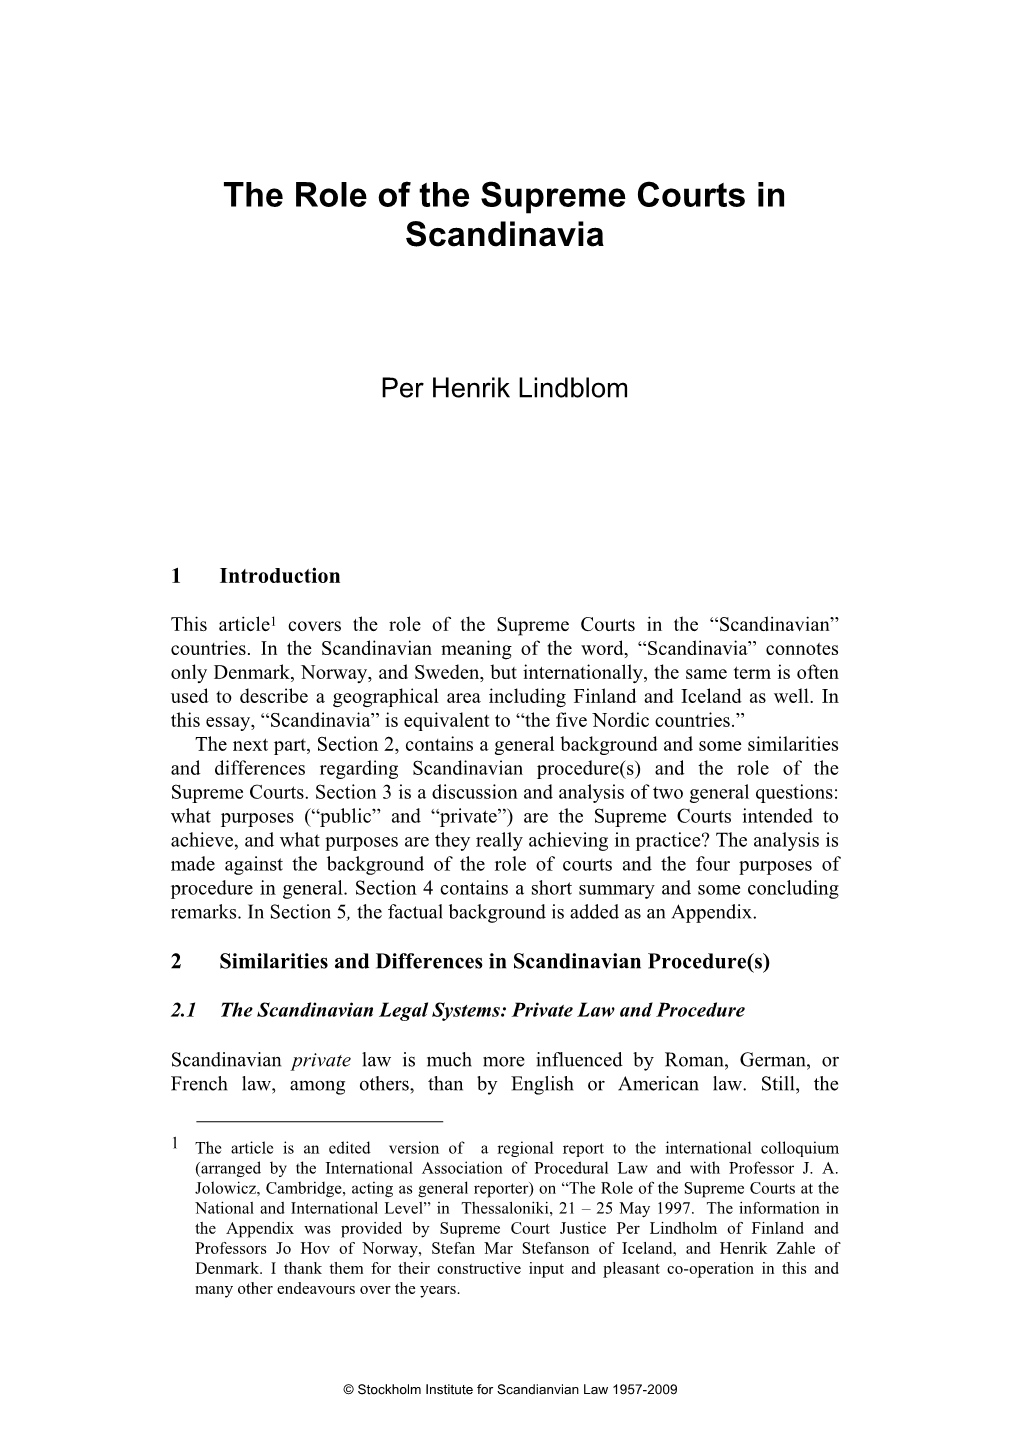 The Role of the Supreme Courts in Scandinavia